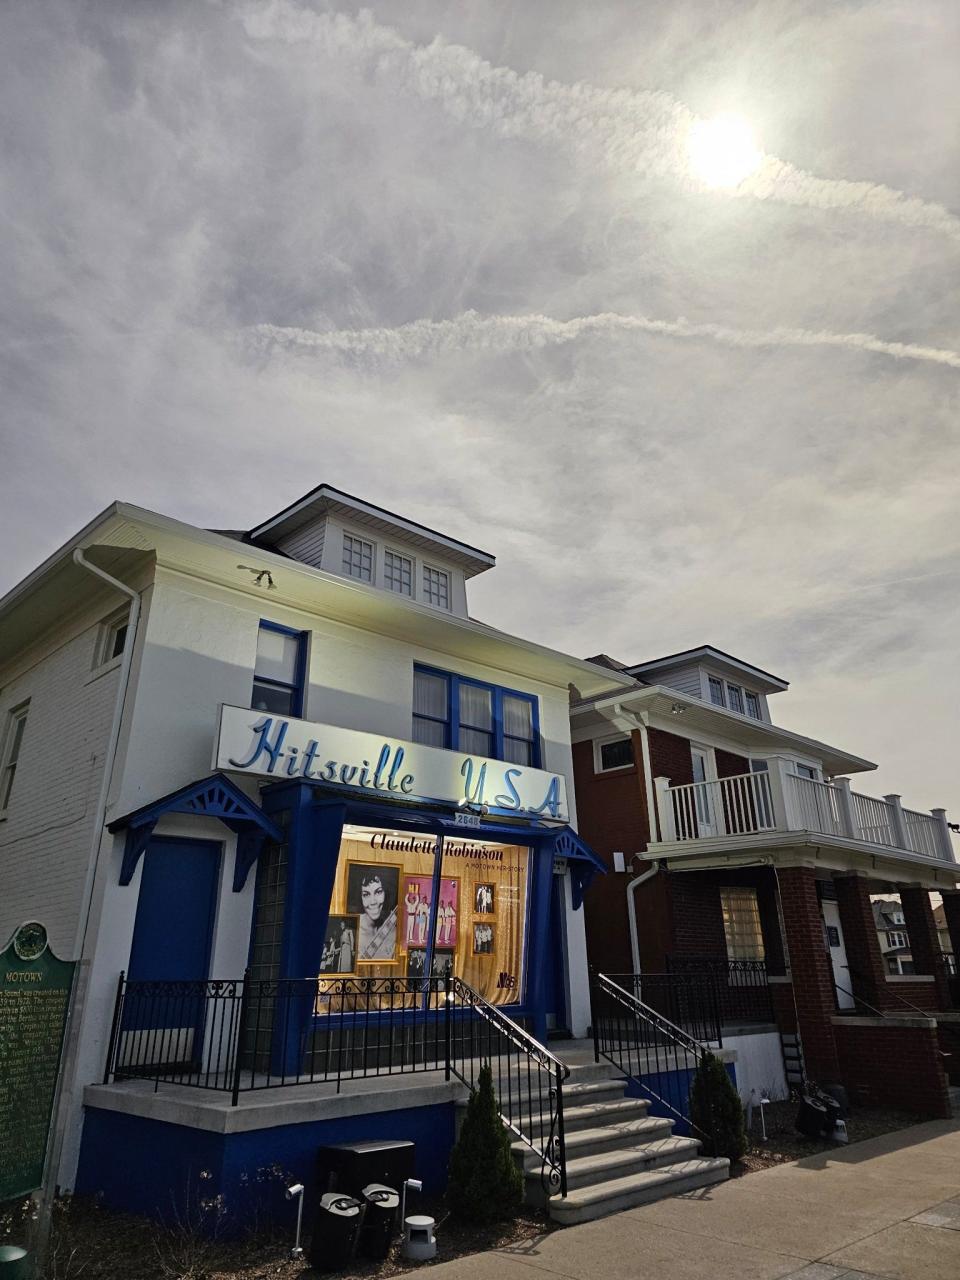 The automatic light outside the Hitsville house in Detroit came on when it got dark enough during the solar eclipse on Monday, April 8, 2024.